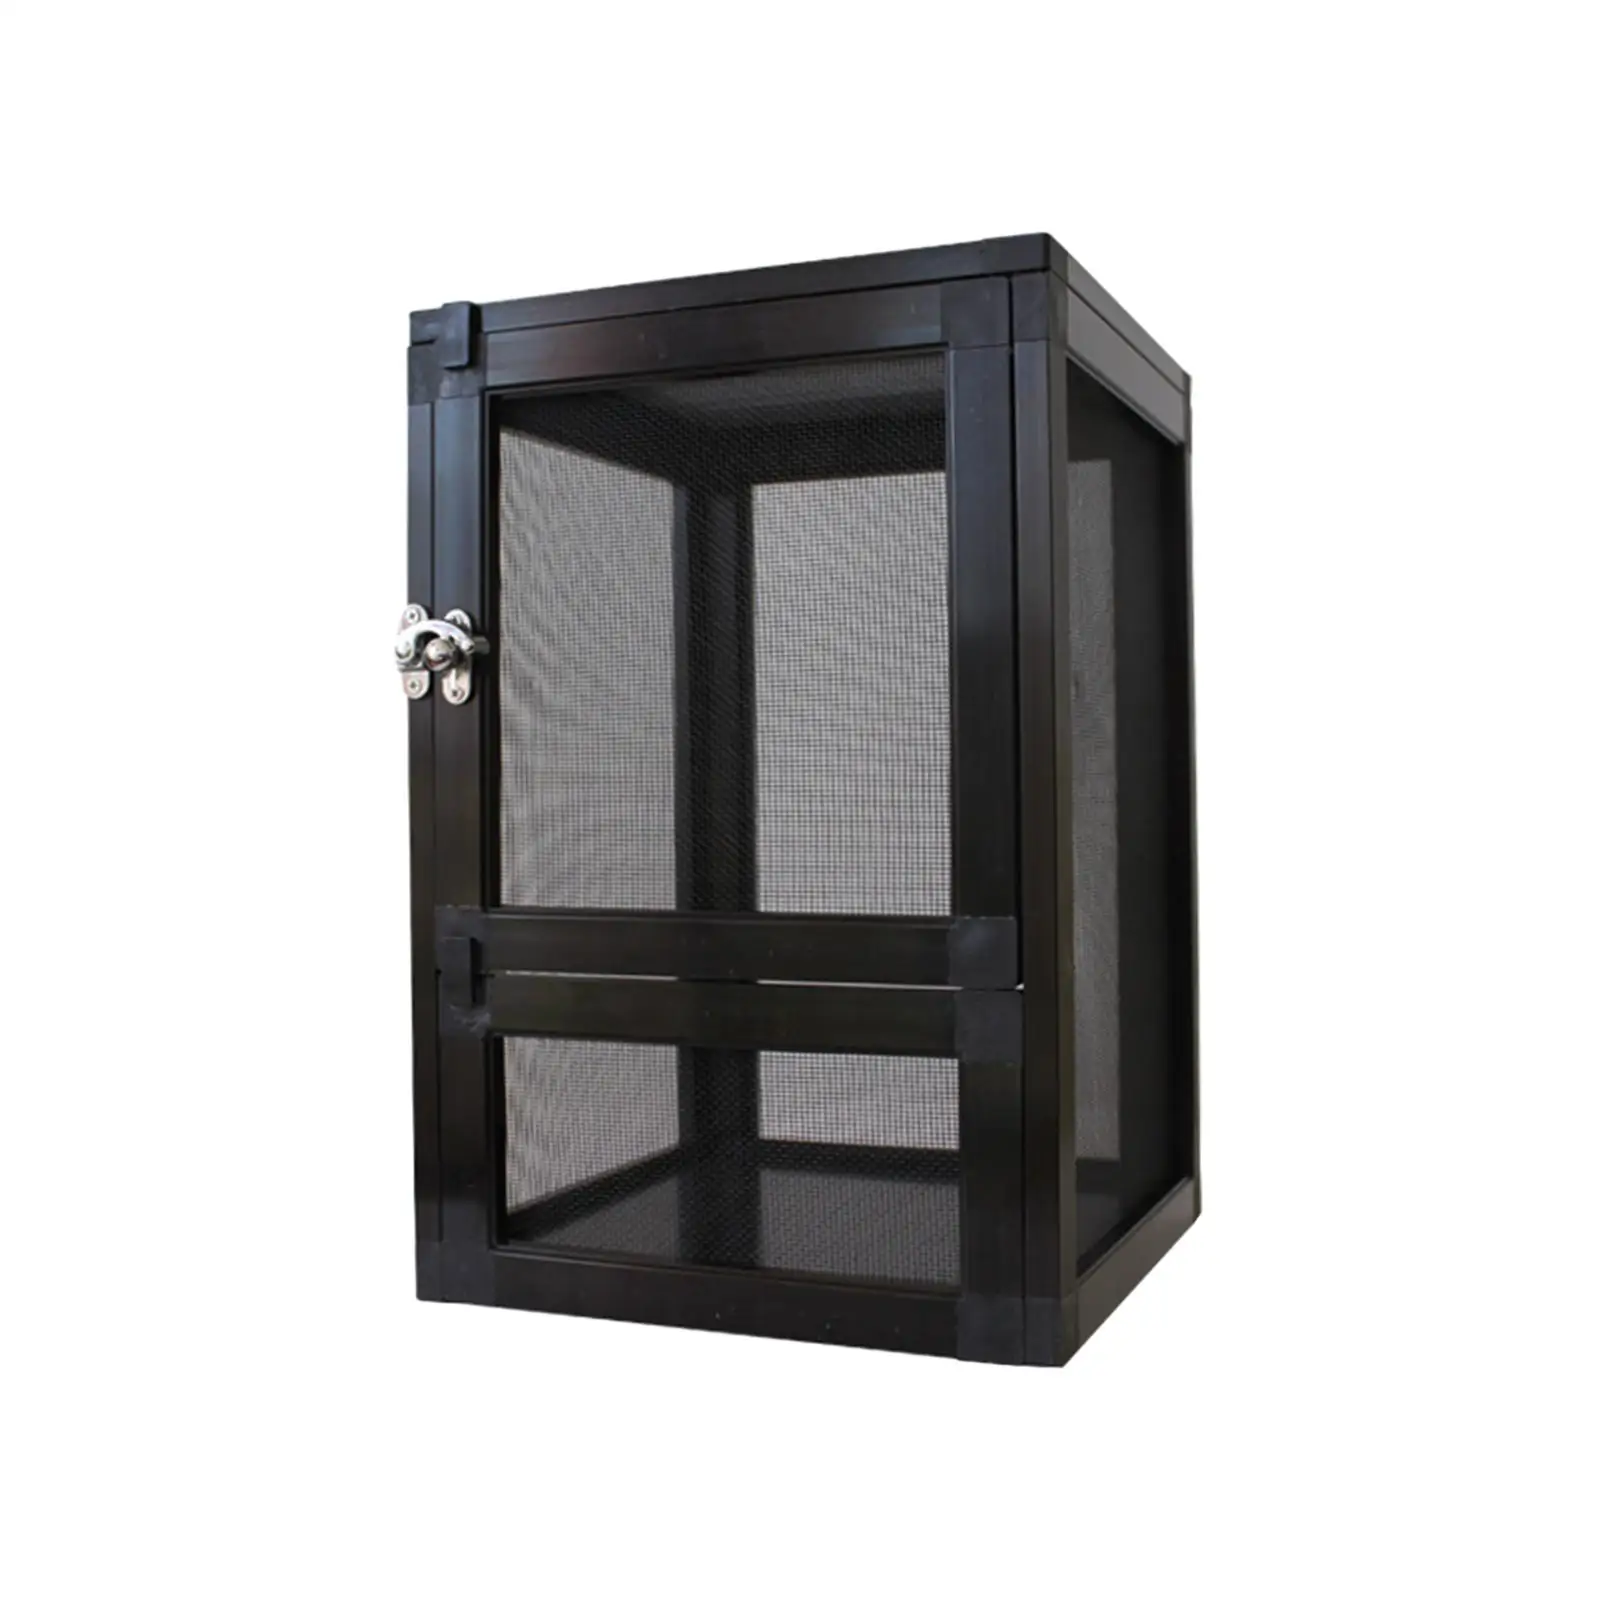 Air Screen Cages Ventilation Feeding Breeding Box Reptile Cage Reptiles Habitat for Frog Butterflies Transport Turtle Spiders